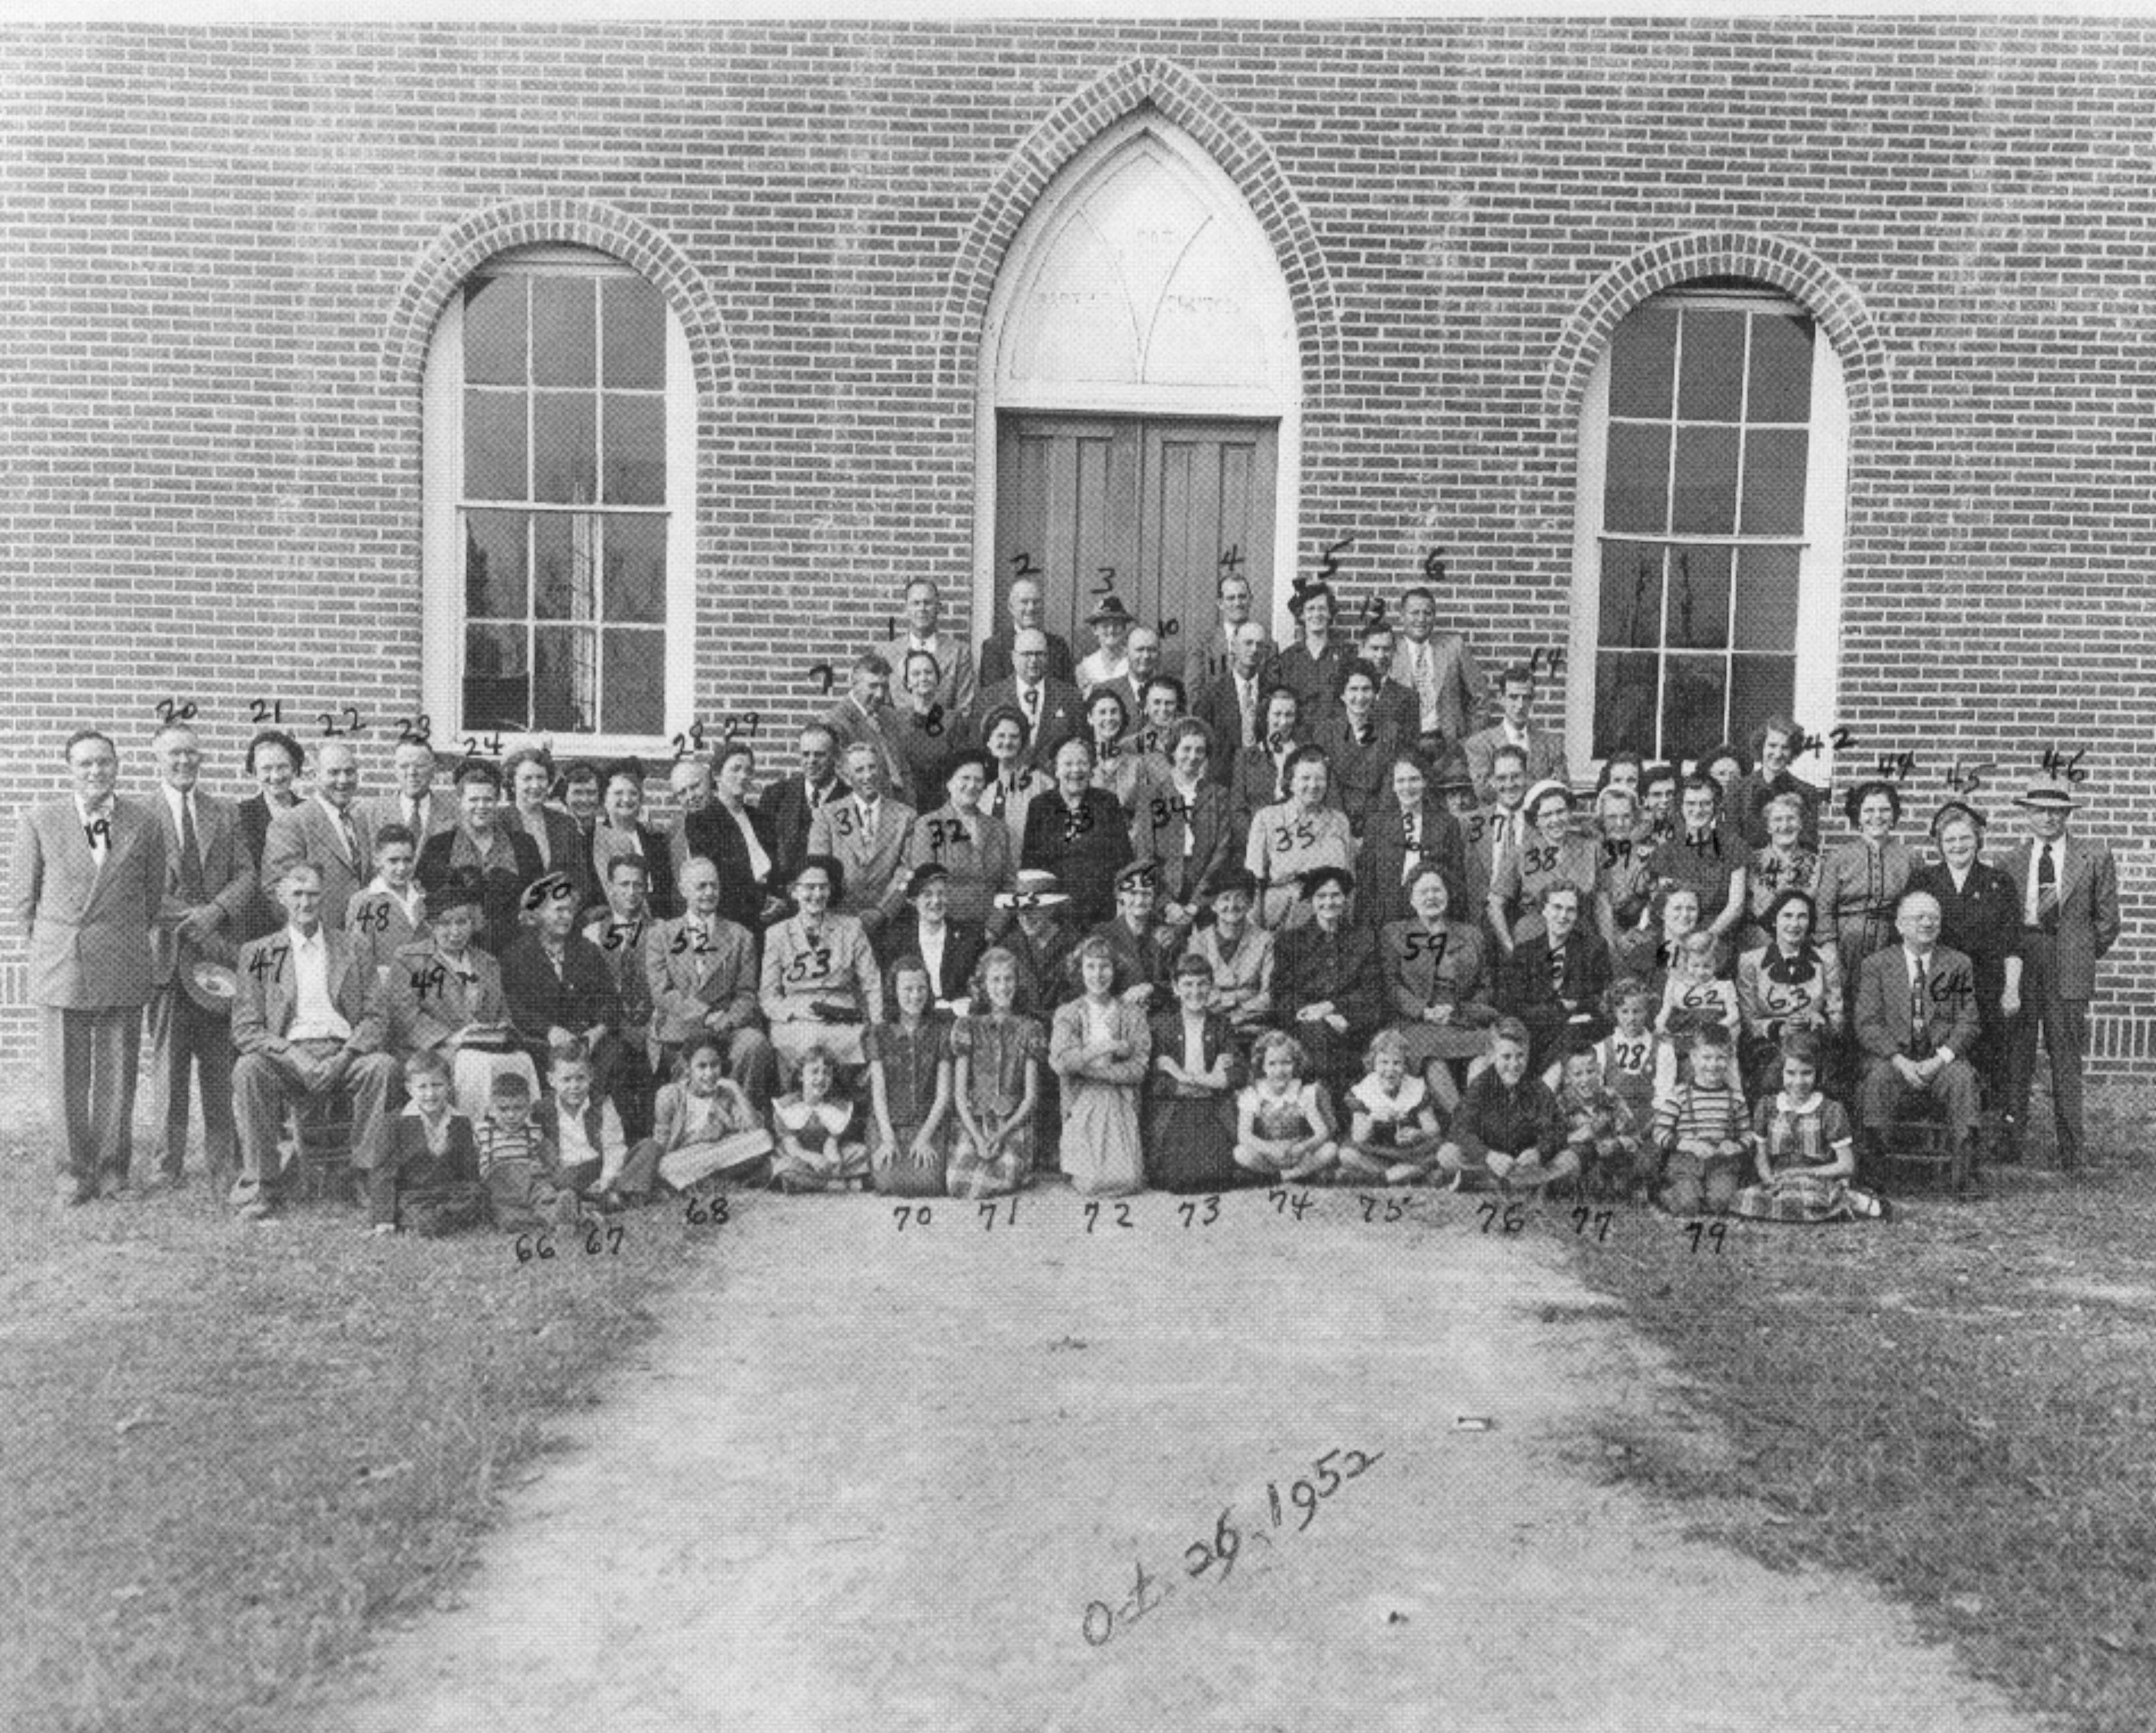 Church congregation 1952 with ID numbers